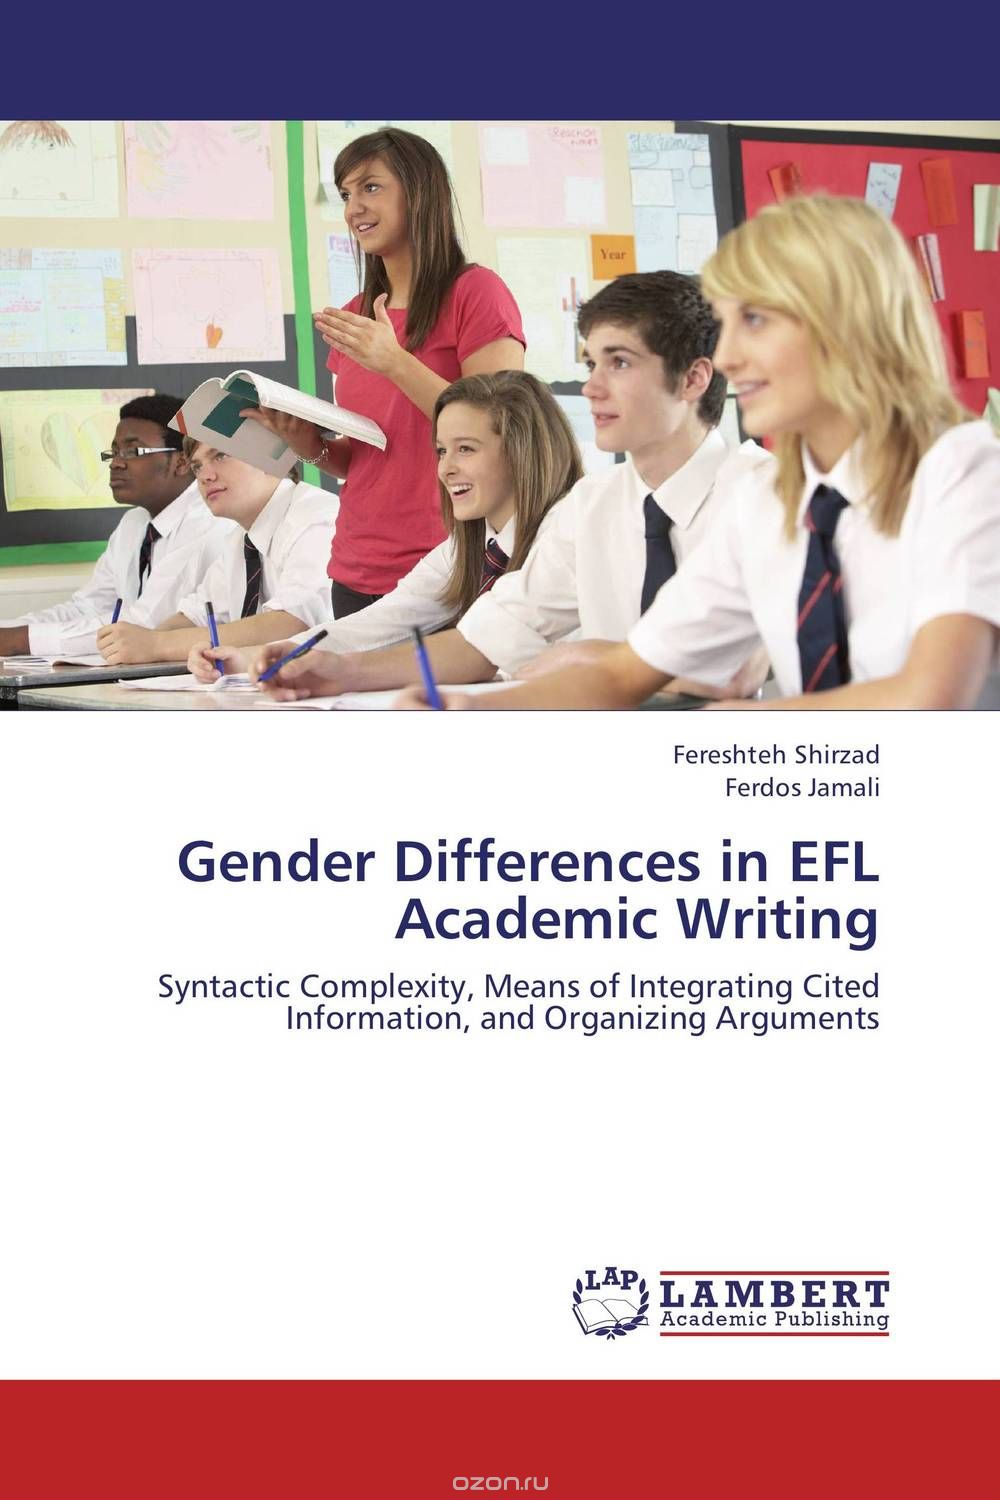 Gender Differences in EFL Academic Writing